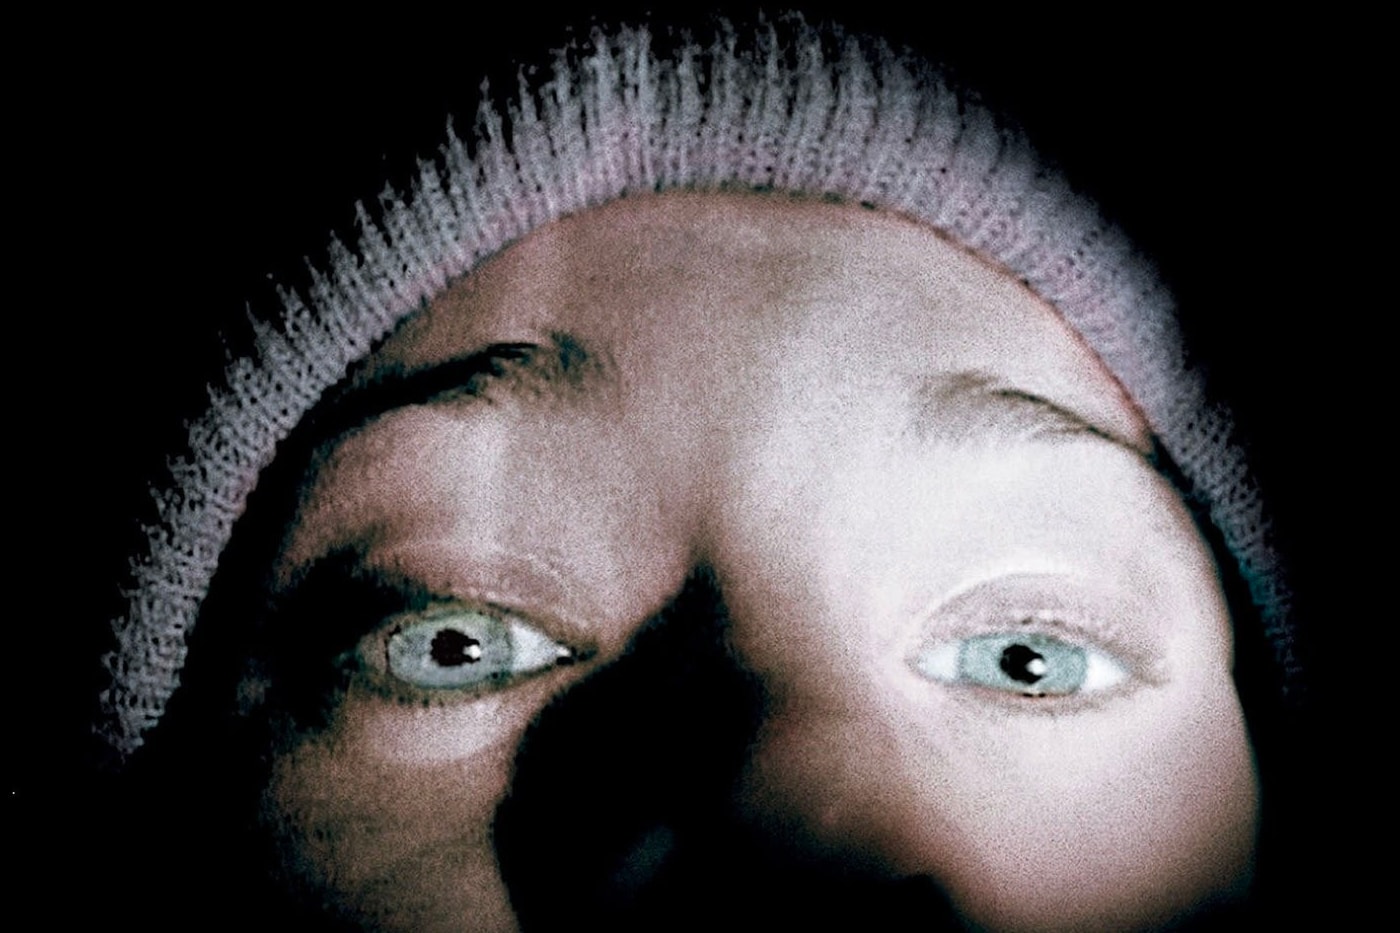 Lionsgate Blumhouse Developing The Blair Witch Project Remake